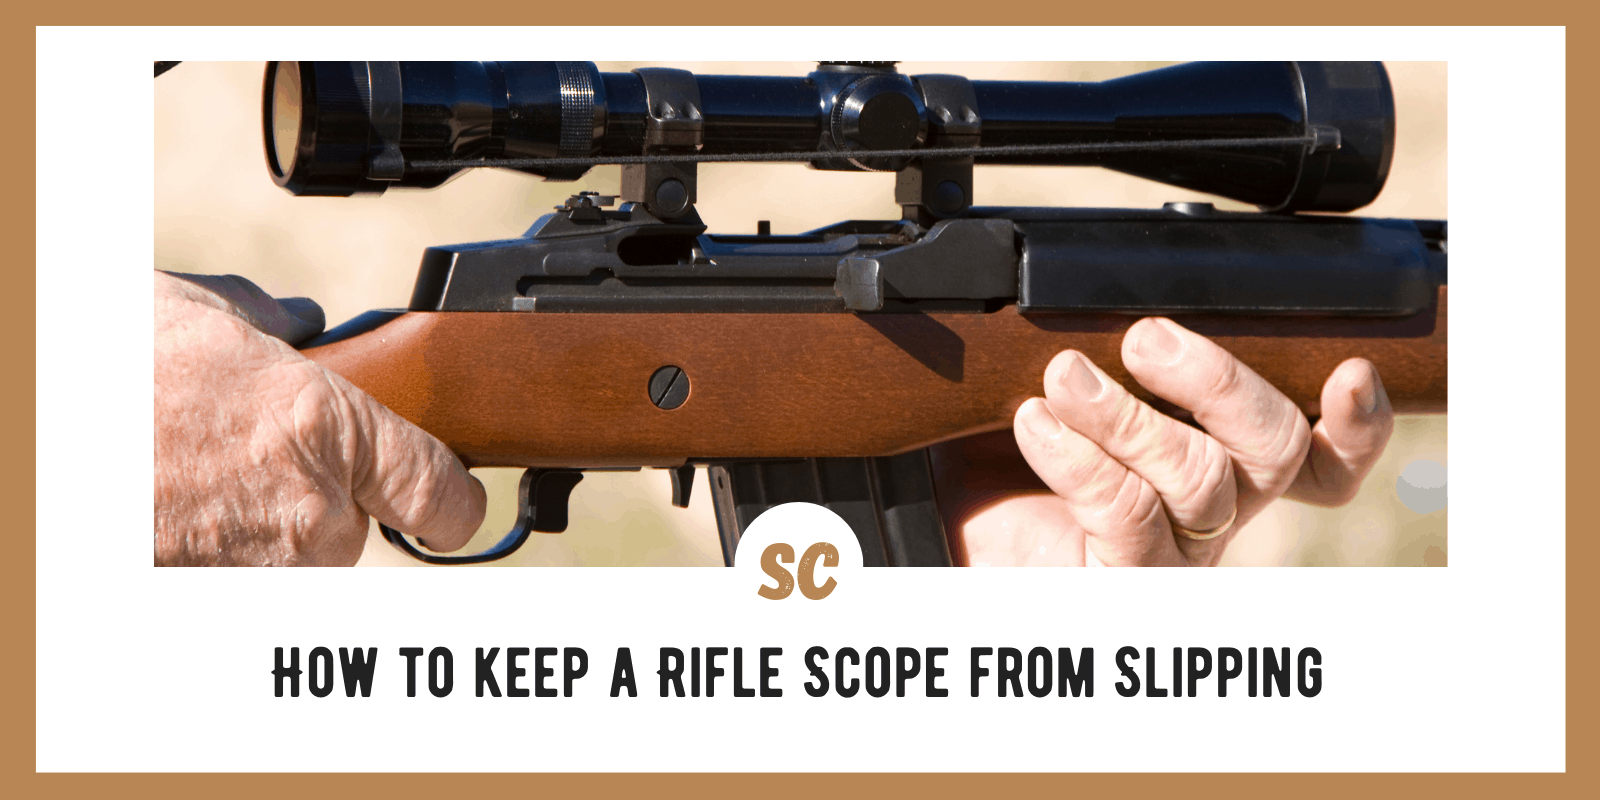 How To Keep a Rifle Scope From Slipping: My Expert Tips